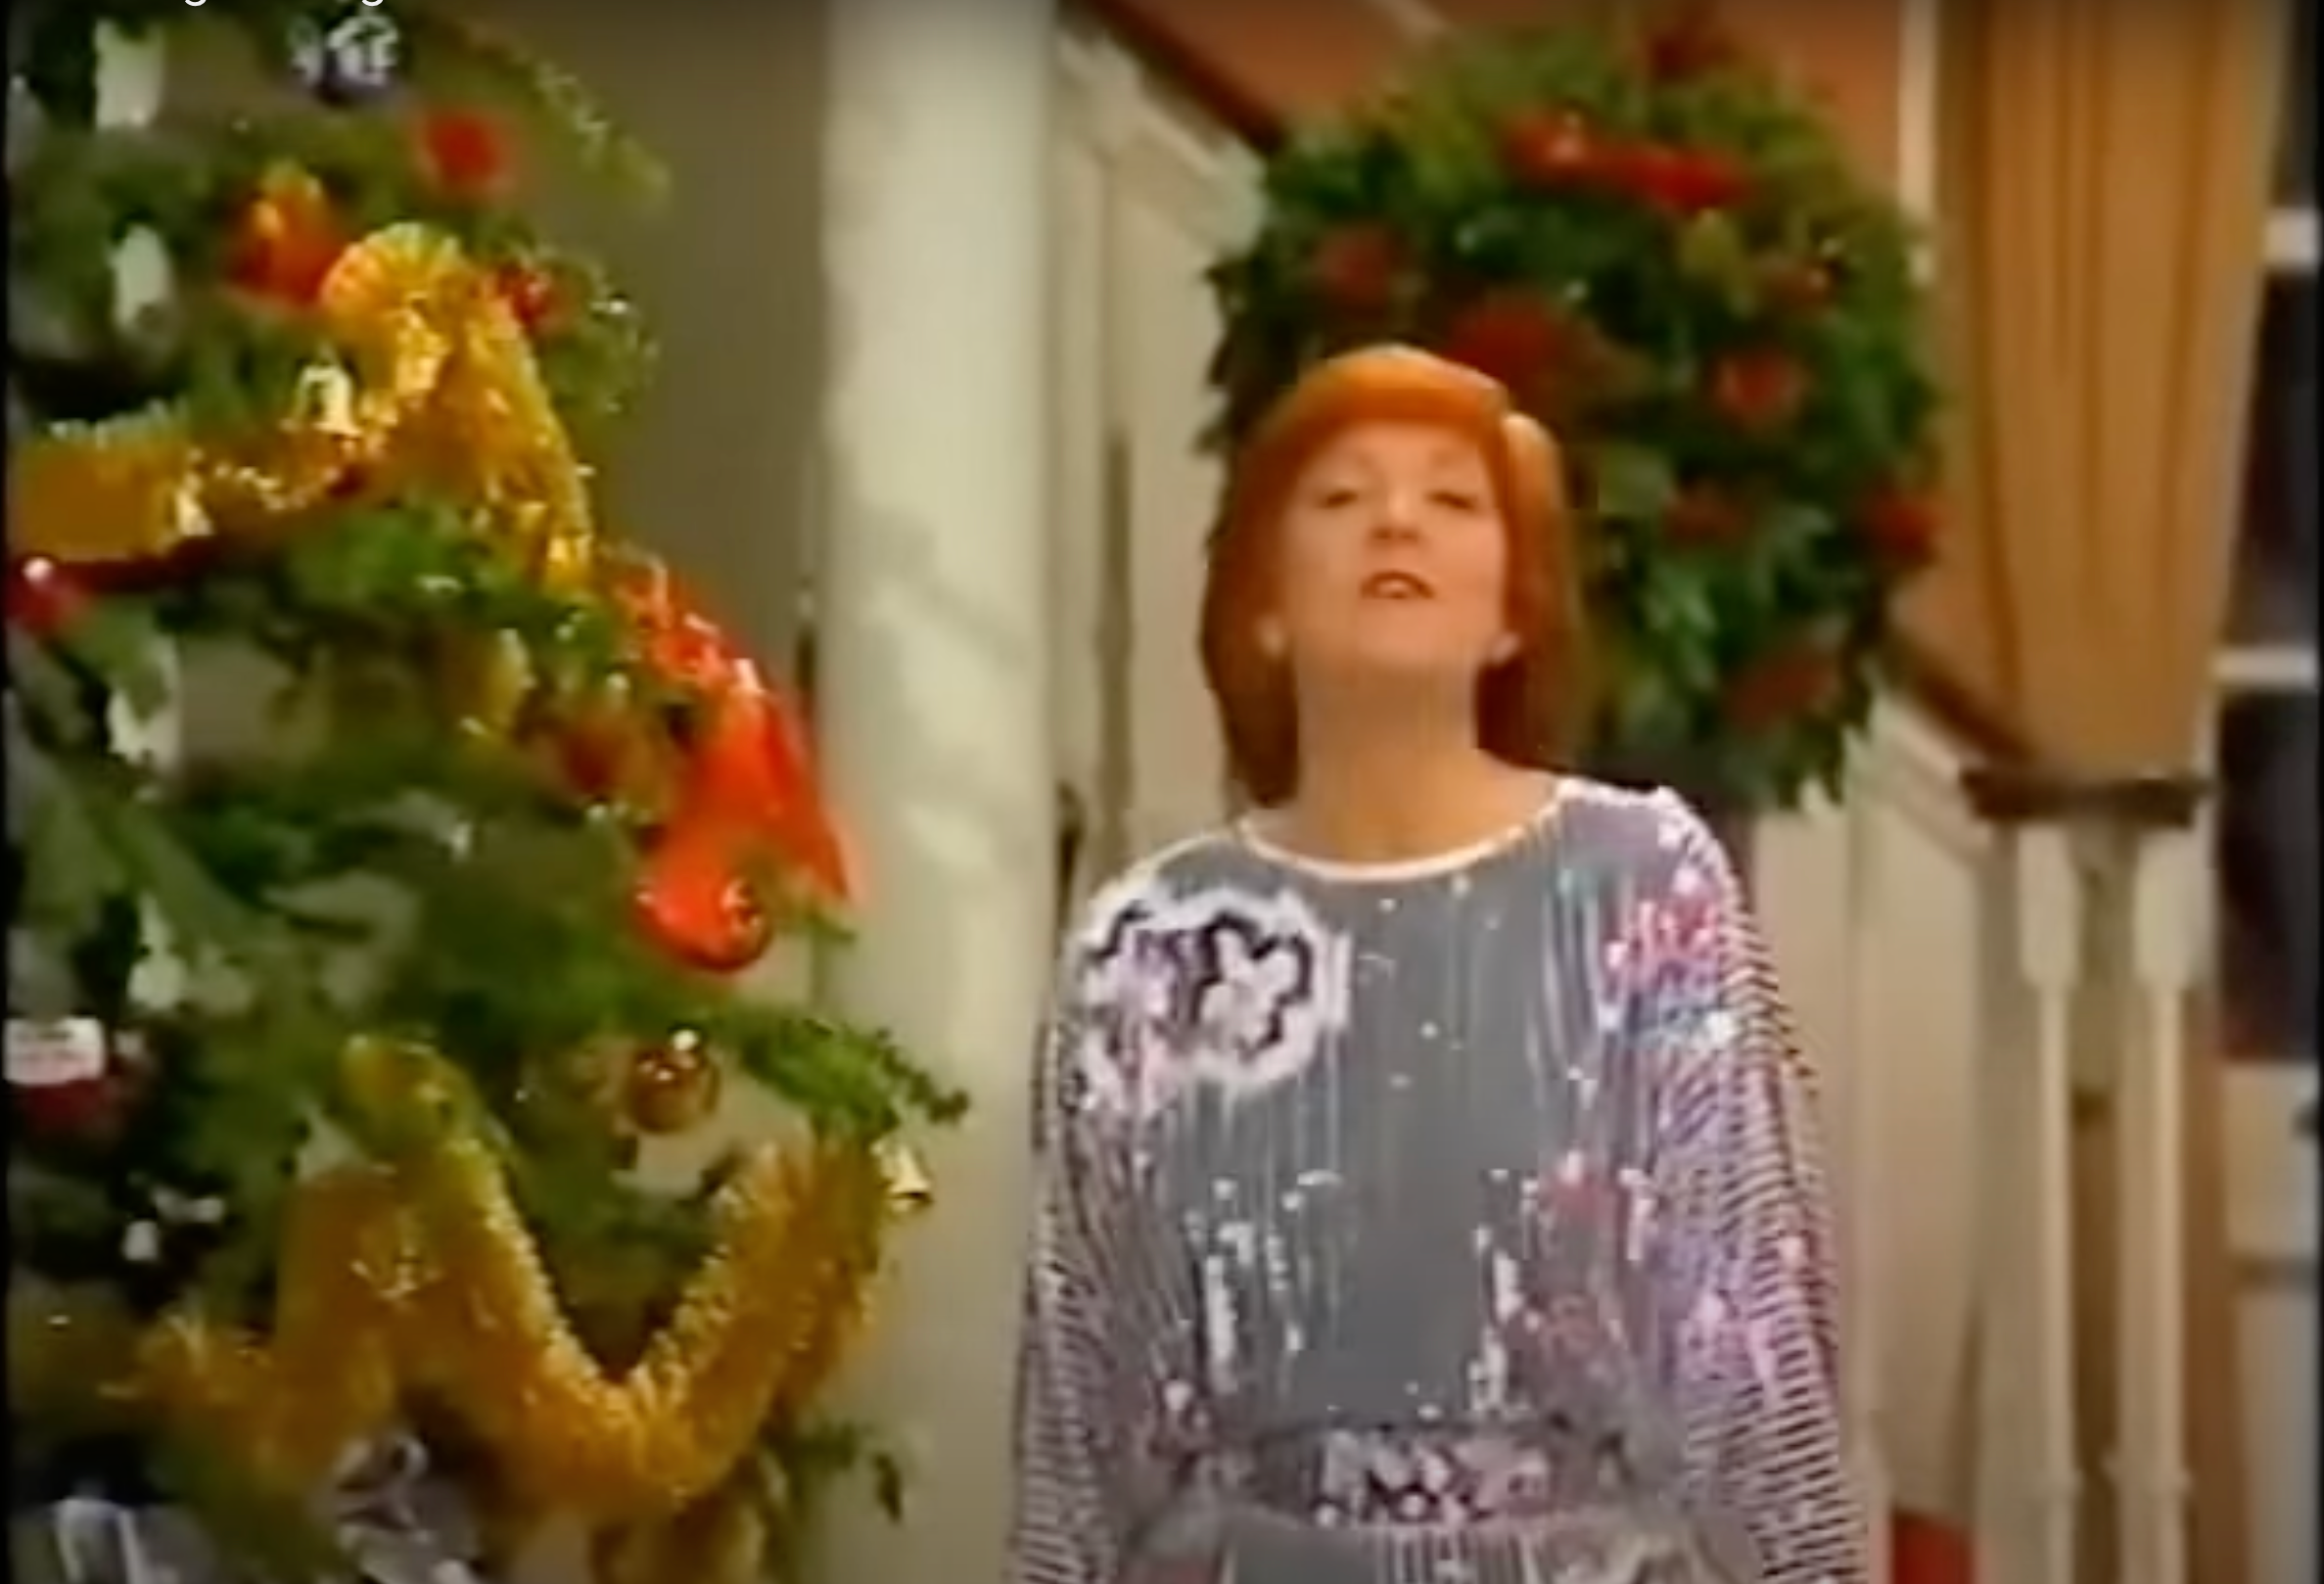 Cilla Black performing ‘All Night Long’ for her LWT Christmas special in 1983